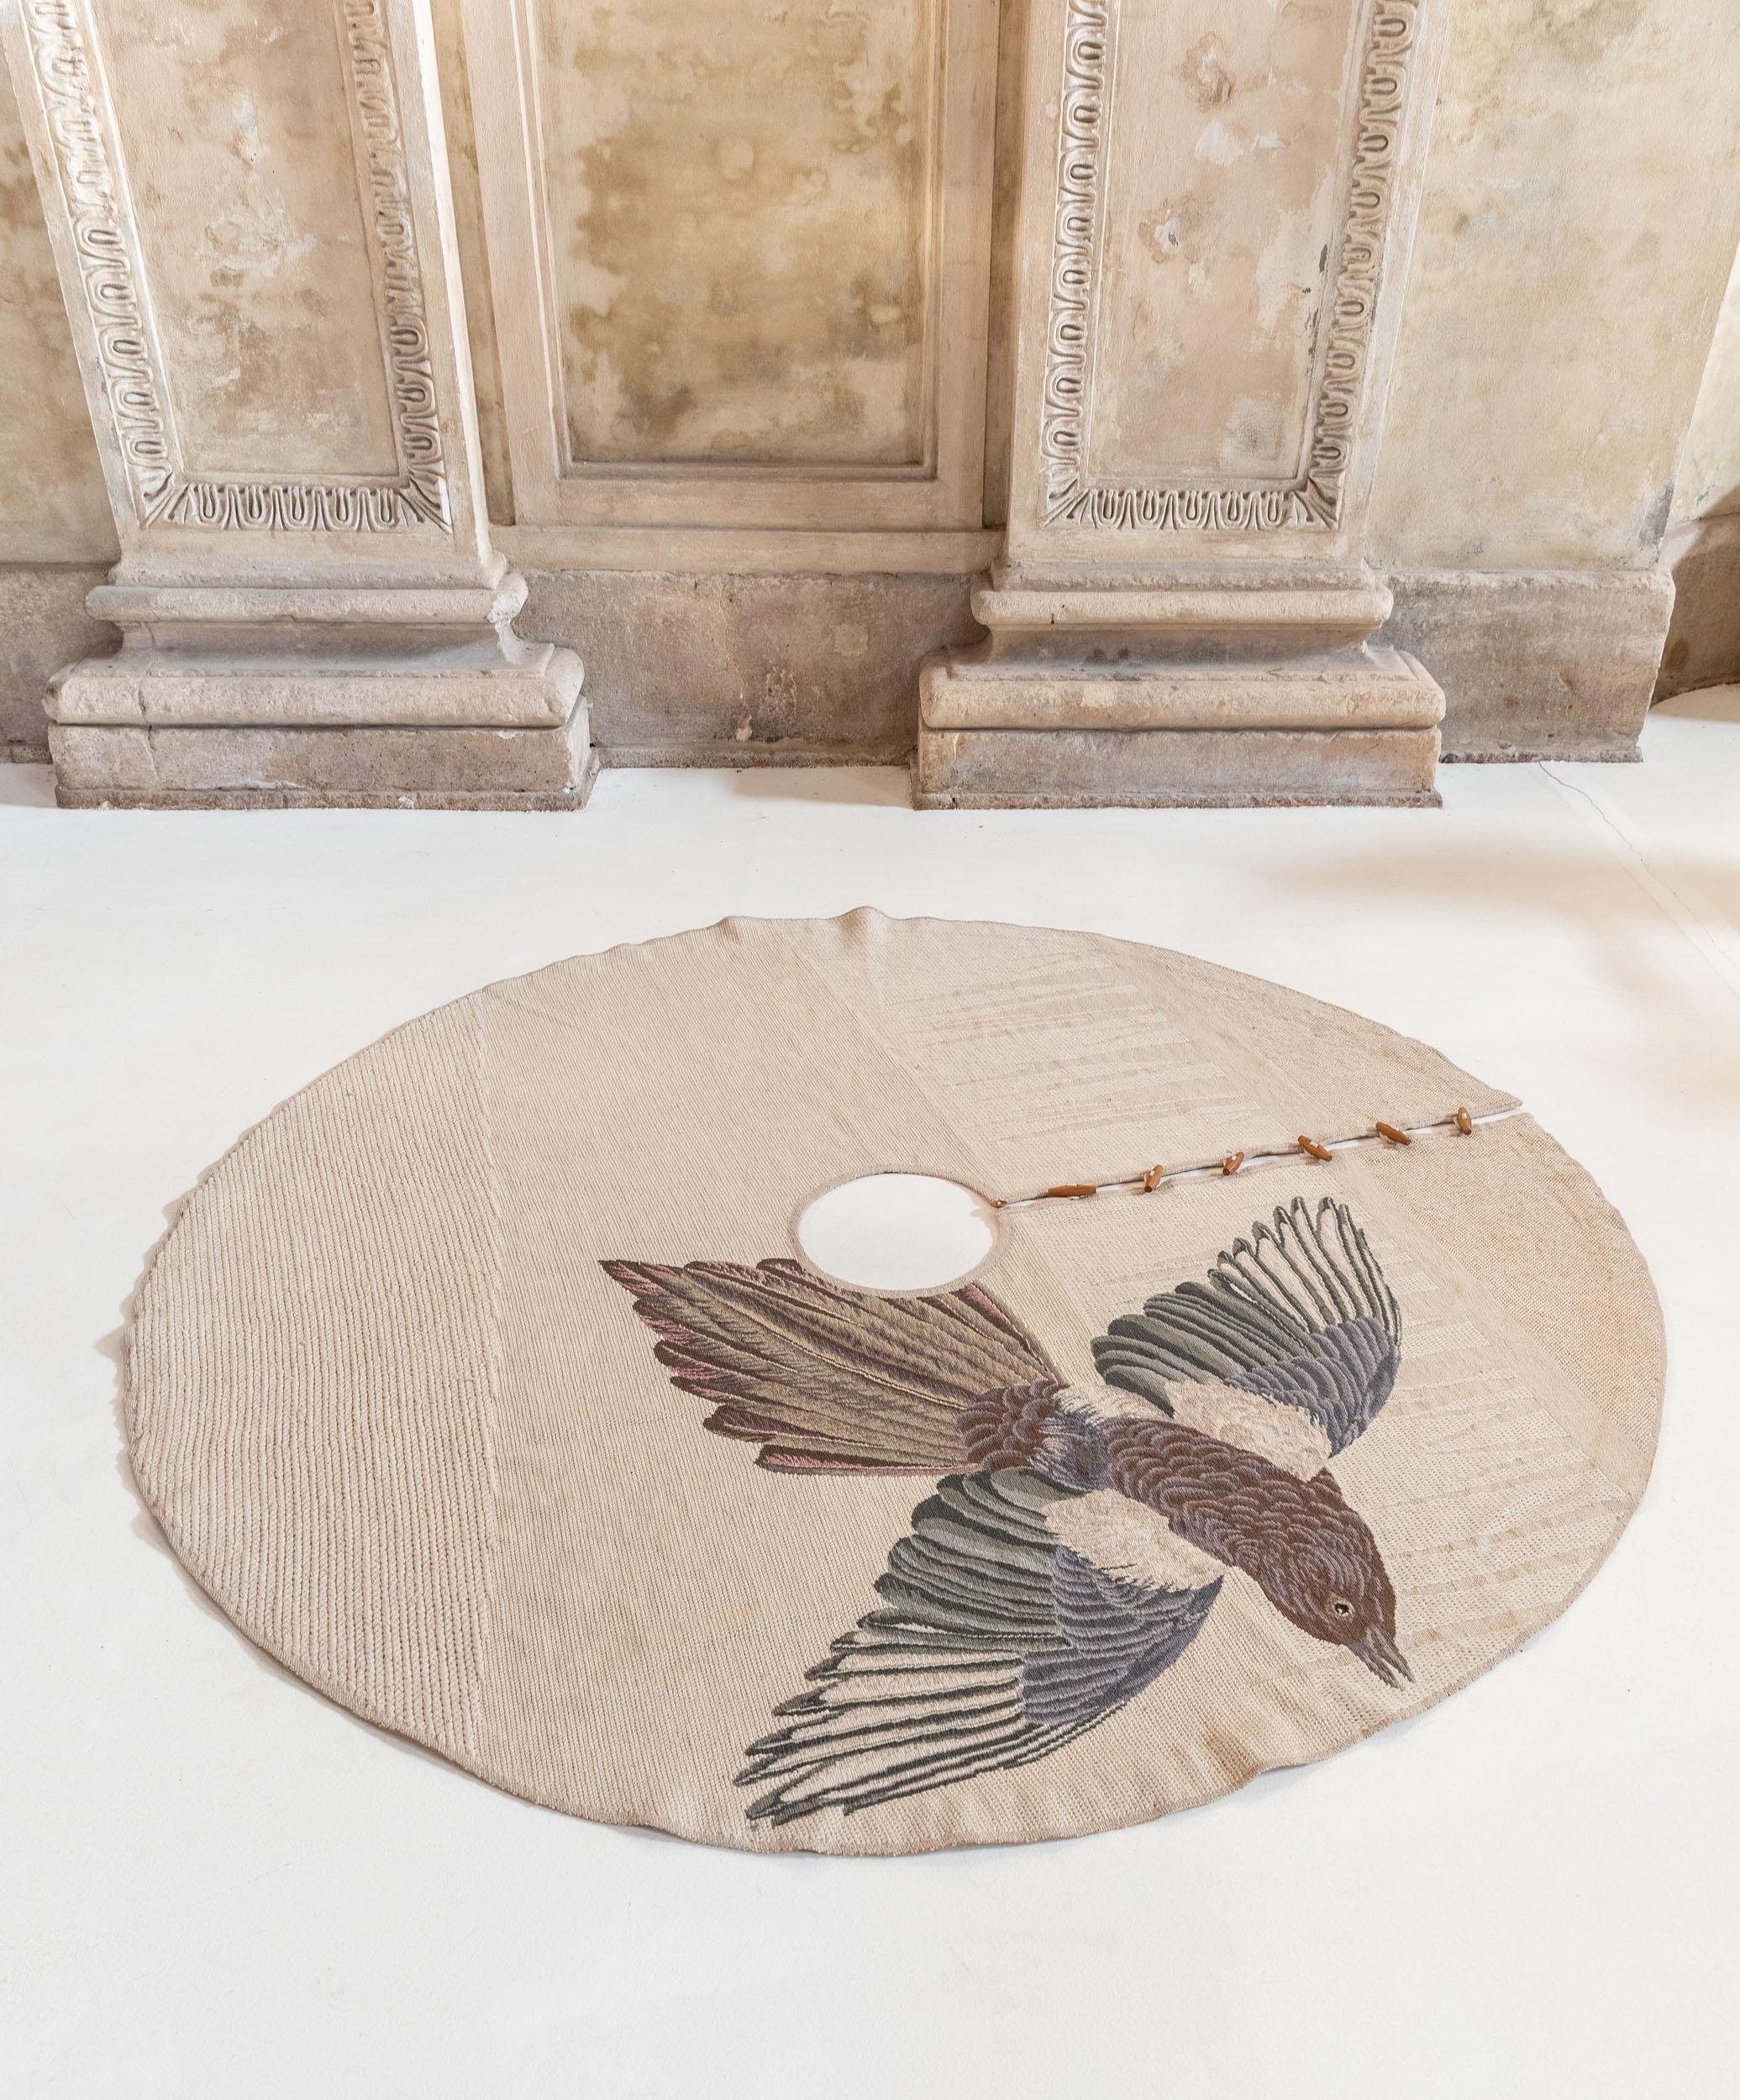 Studio FormaFantasma designed MIGRATION, a collection of three rugs for Nodus, inspired by the work of 19th century ornithologist Jan James Audubon, who was scientifically categorizing birds. 

On the final designs, instead of minuscule and